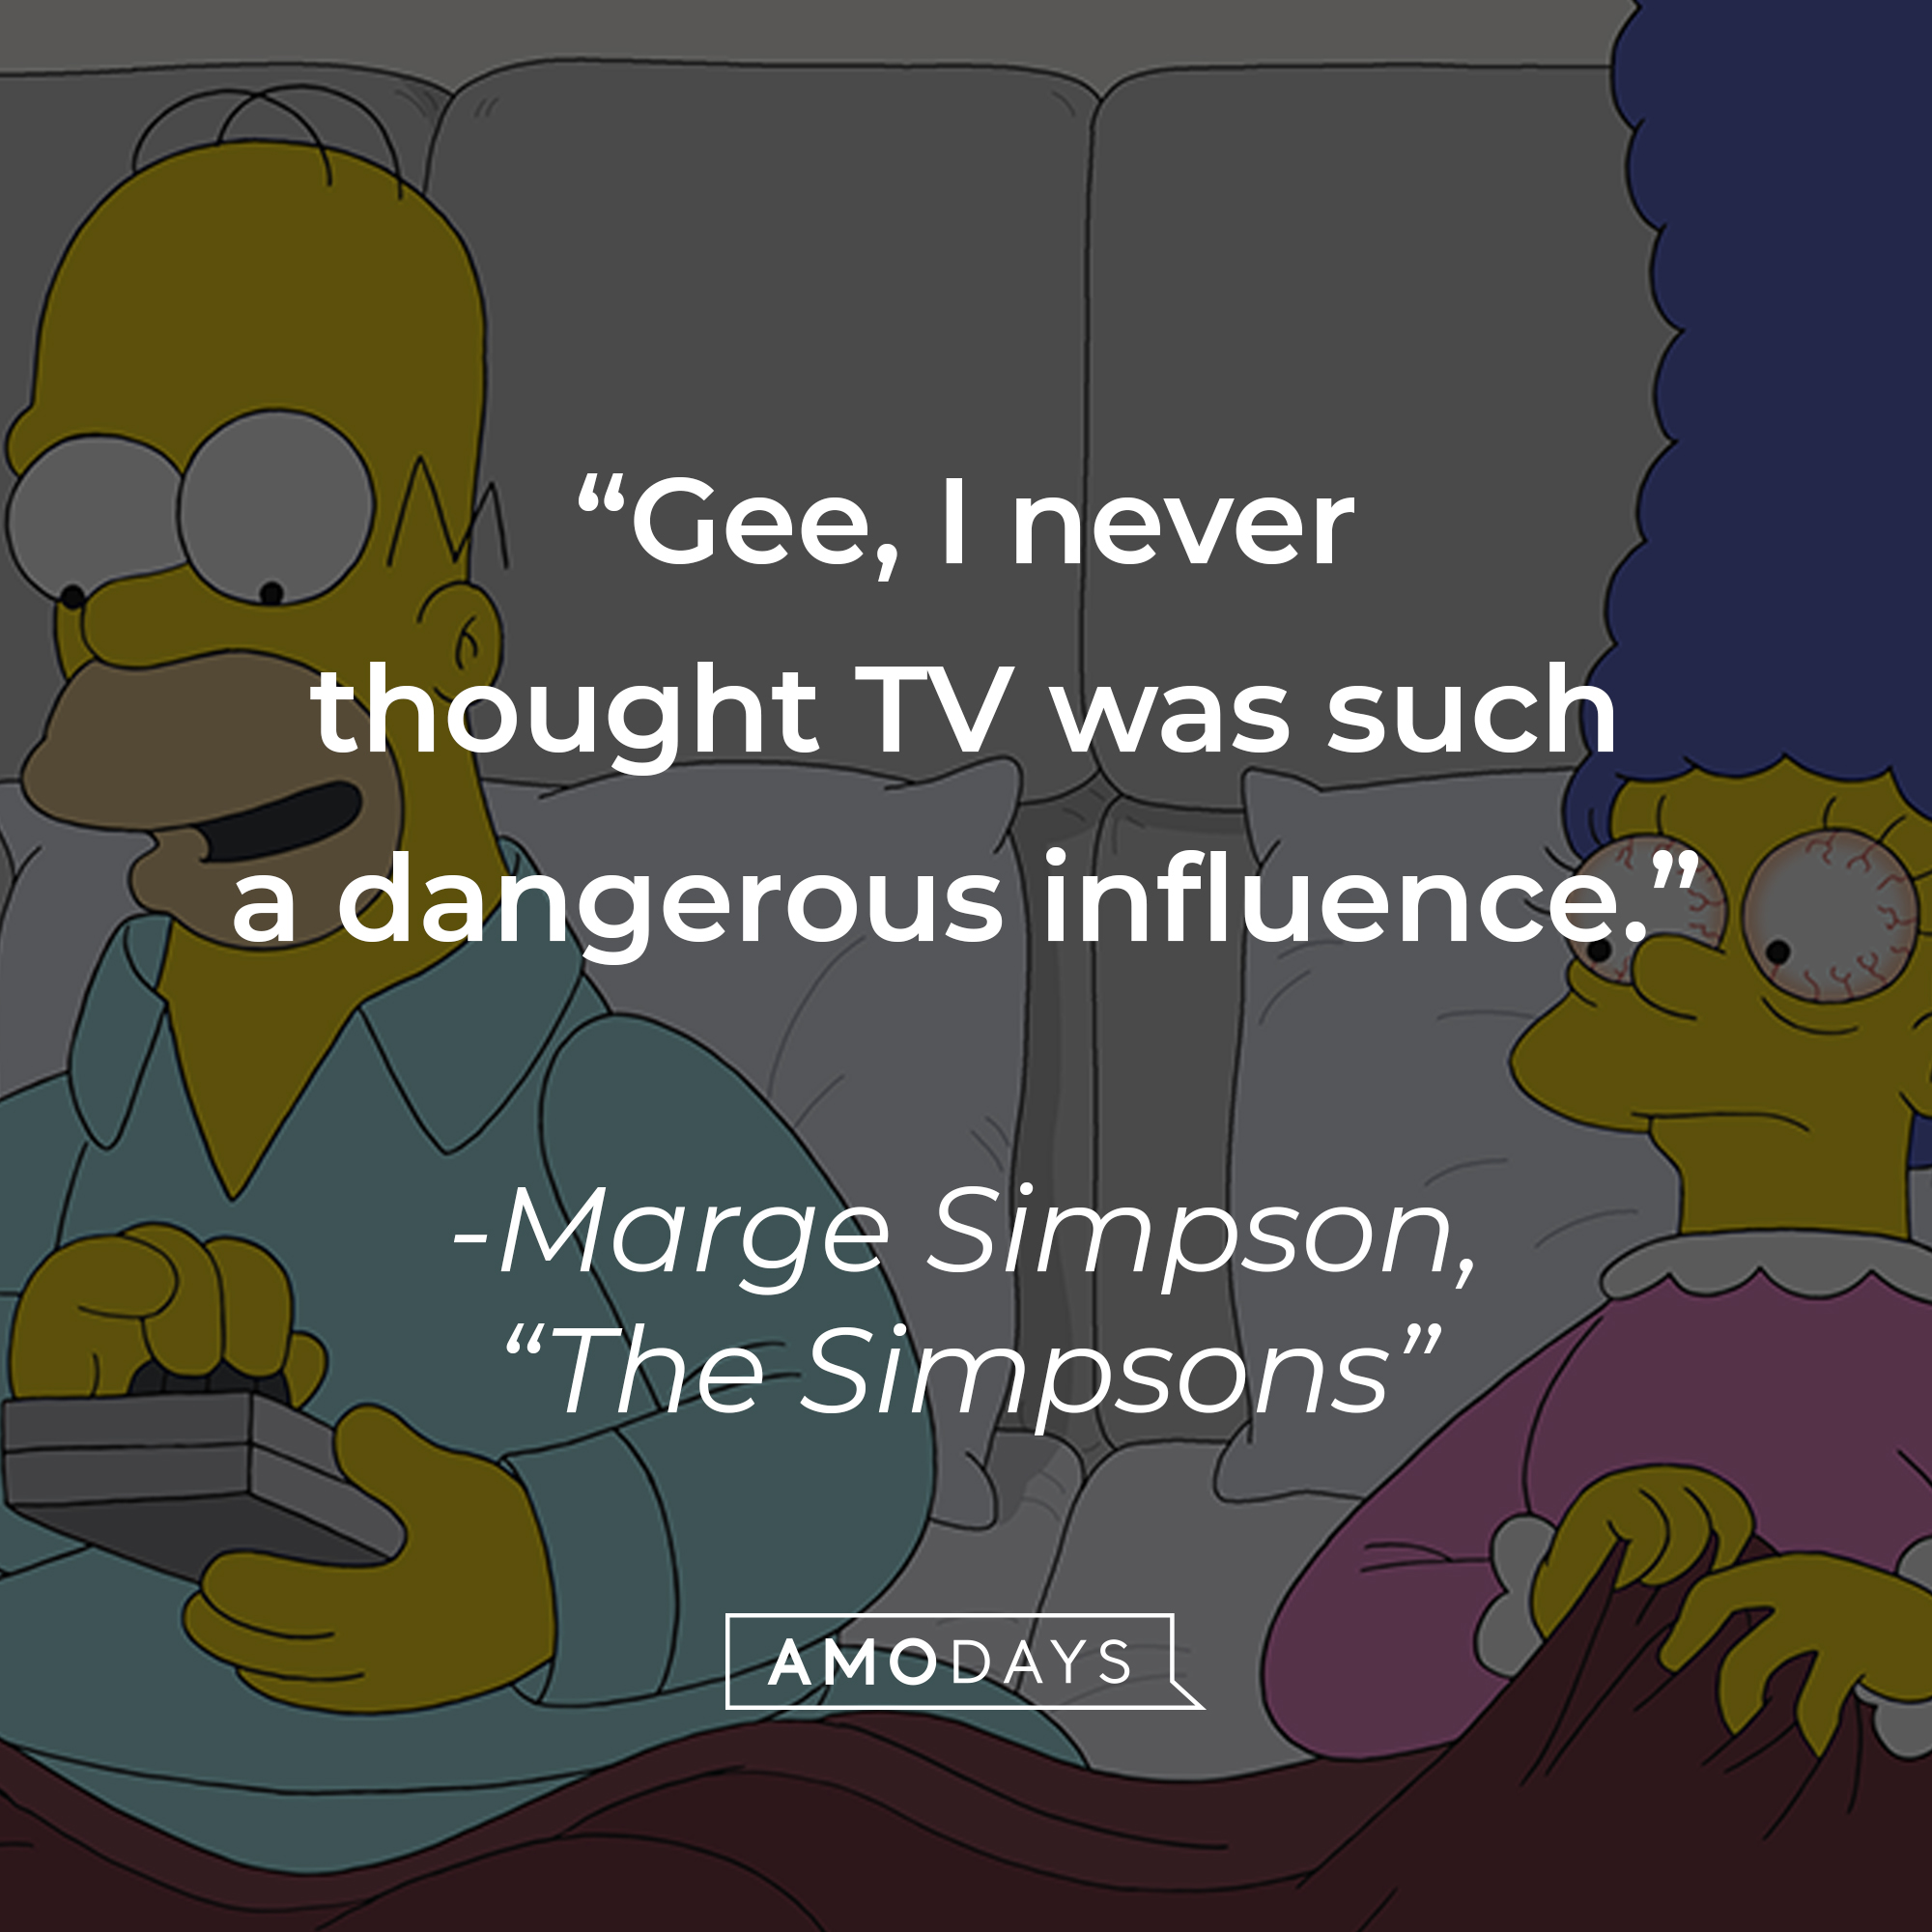 Marge Simpson's quote: "Gee, I never thought TV was such a dangerous influence." | Image: facebook.com/TheSimpsons